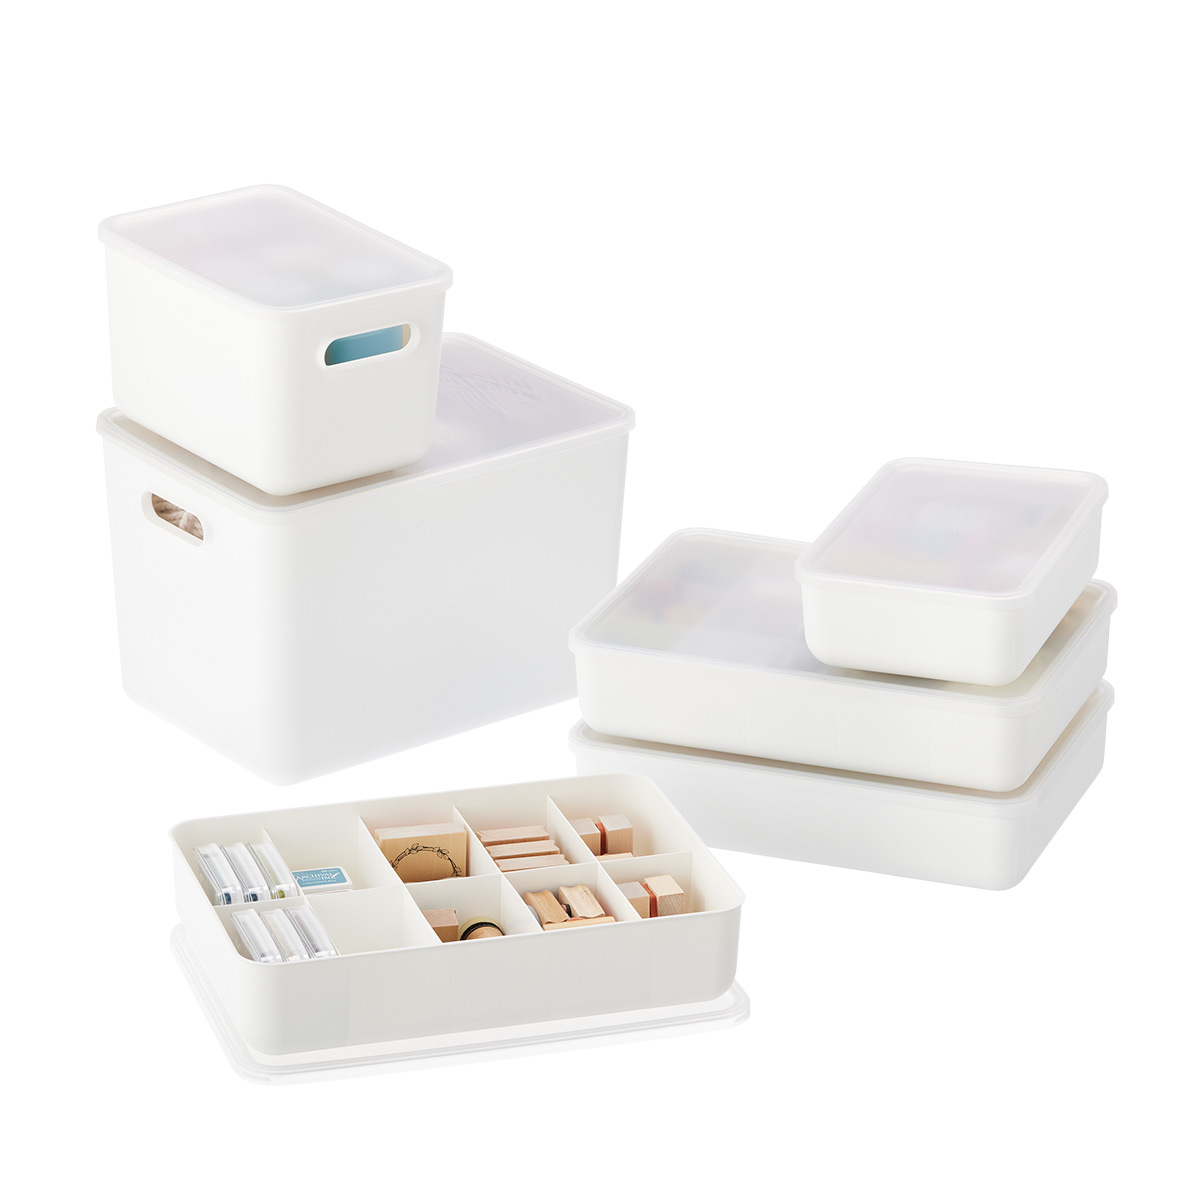 https://www.containerstore.com/catalogimages/435187/10084798G_Small_All_In_Modular_Box_W.jpg